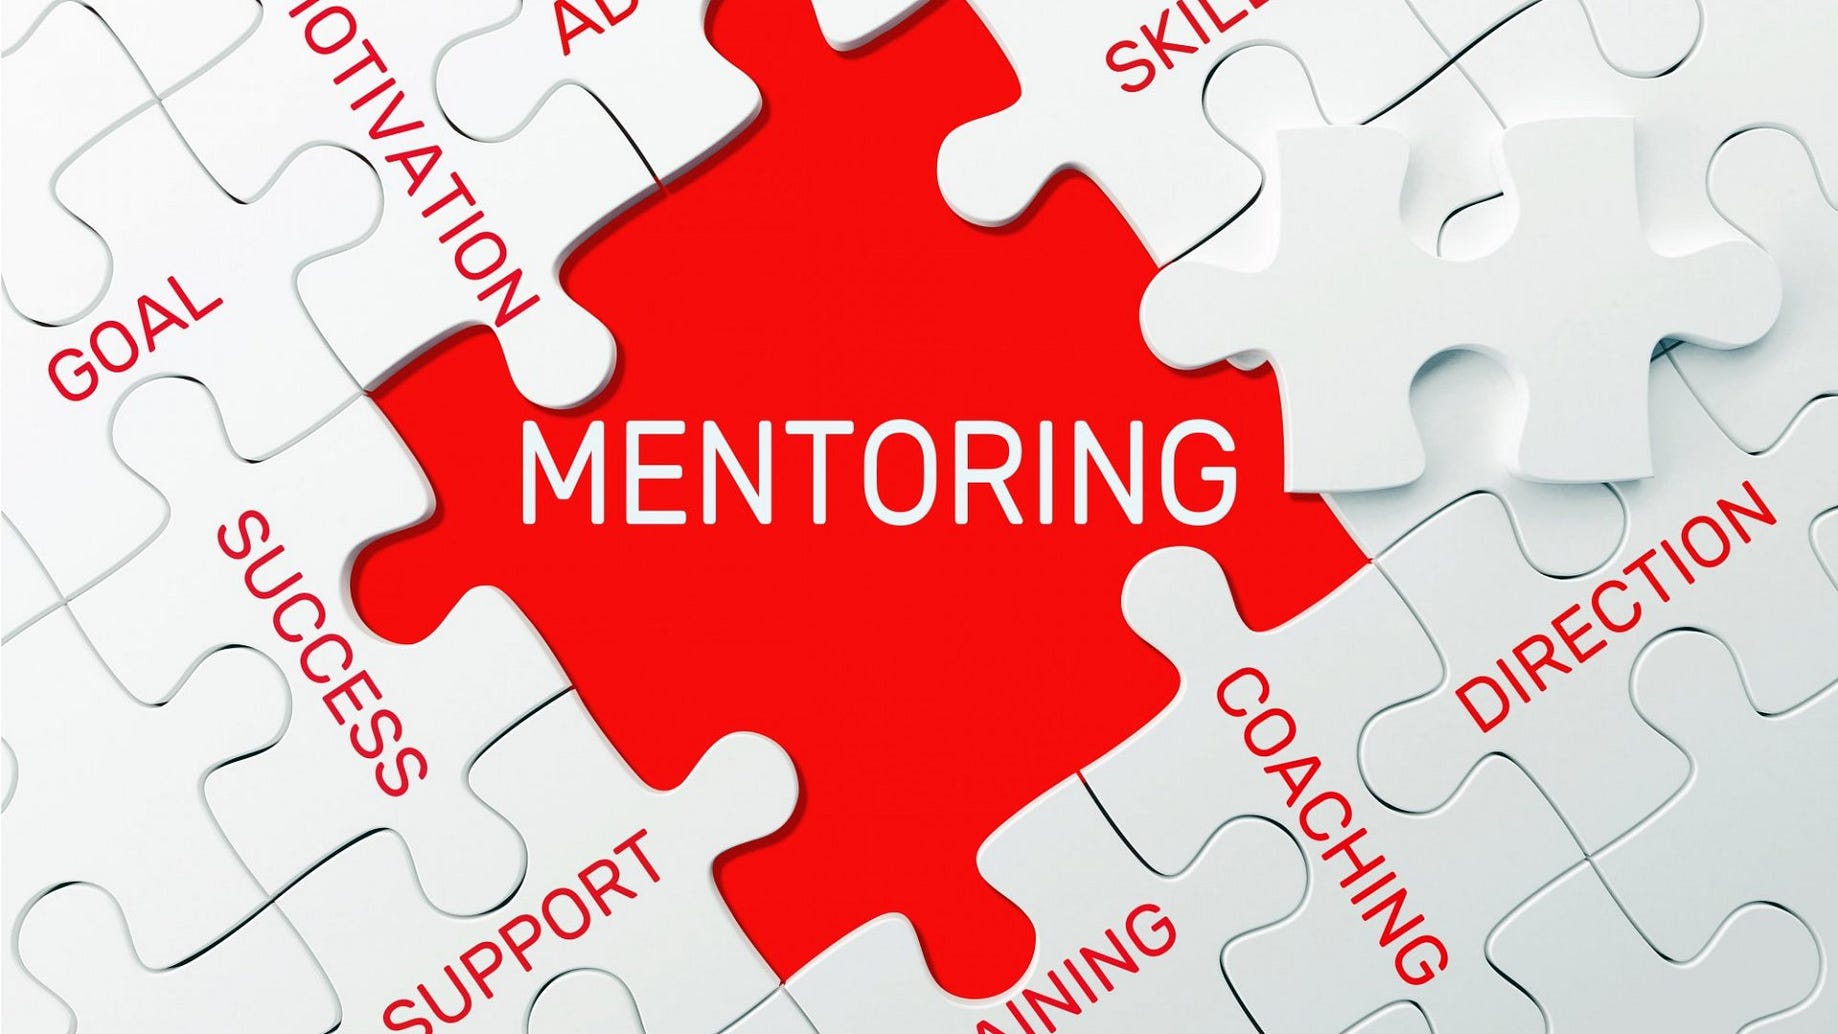 How to Ask Someone Be Your Mentor | by Saheed Oladosu The Startup | Medium